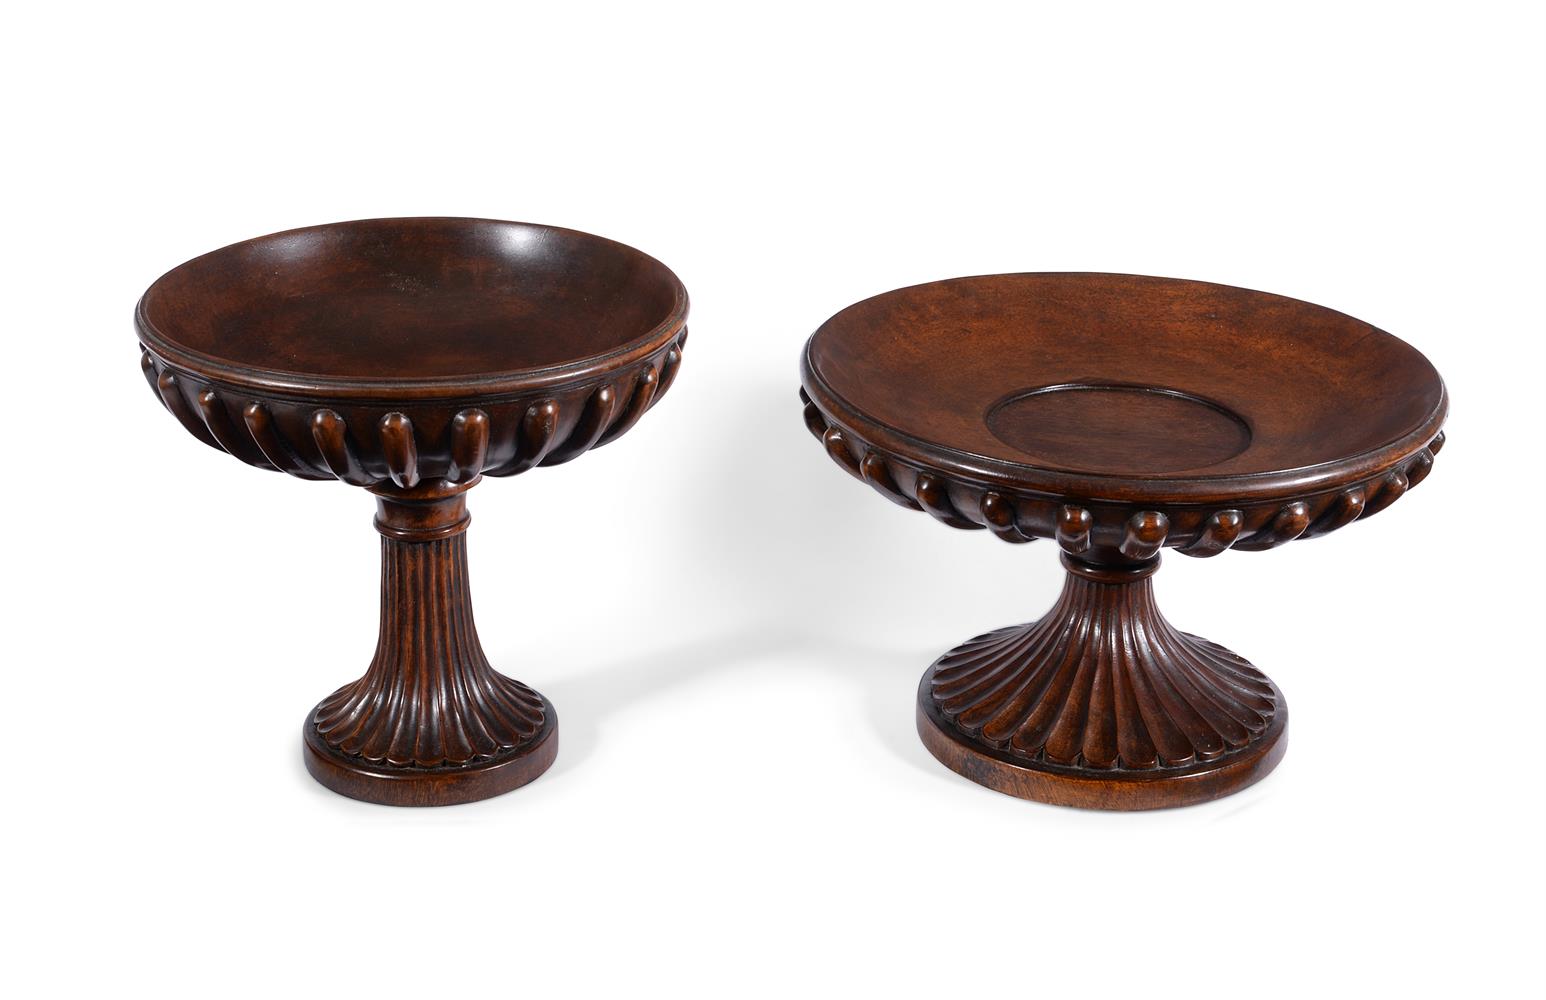 A MAHOGANY TWO TIER TAZZAE CENTREPIECE IN 19TH CENTURY STYLE - Image 3 of 7